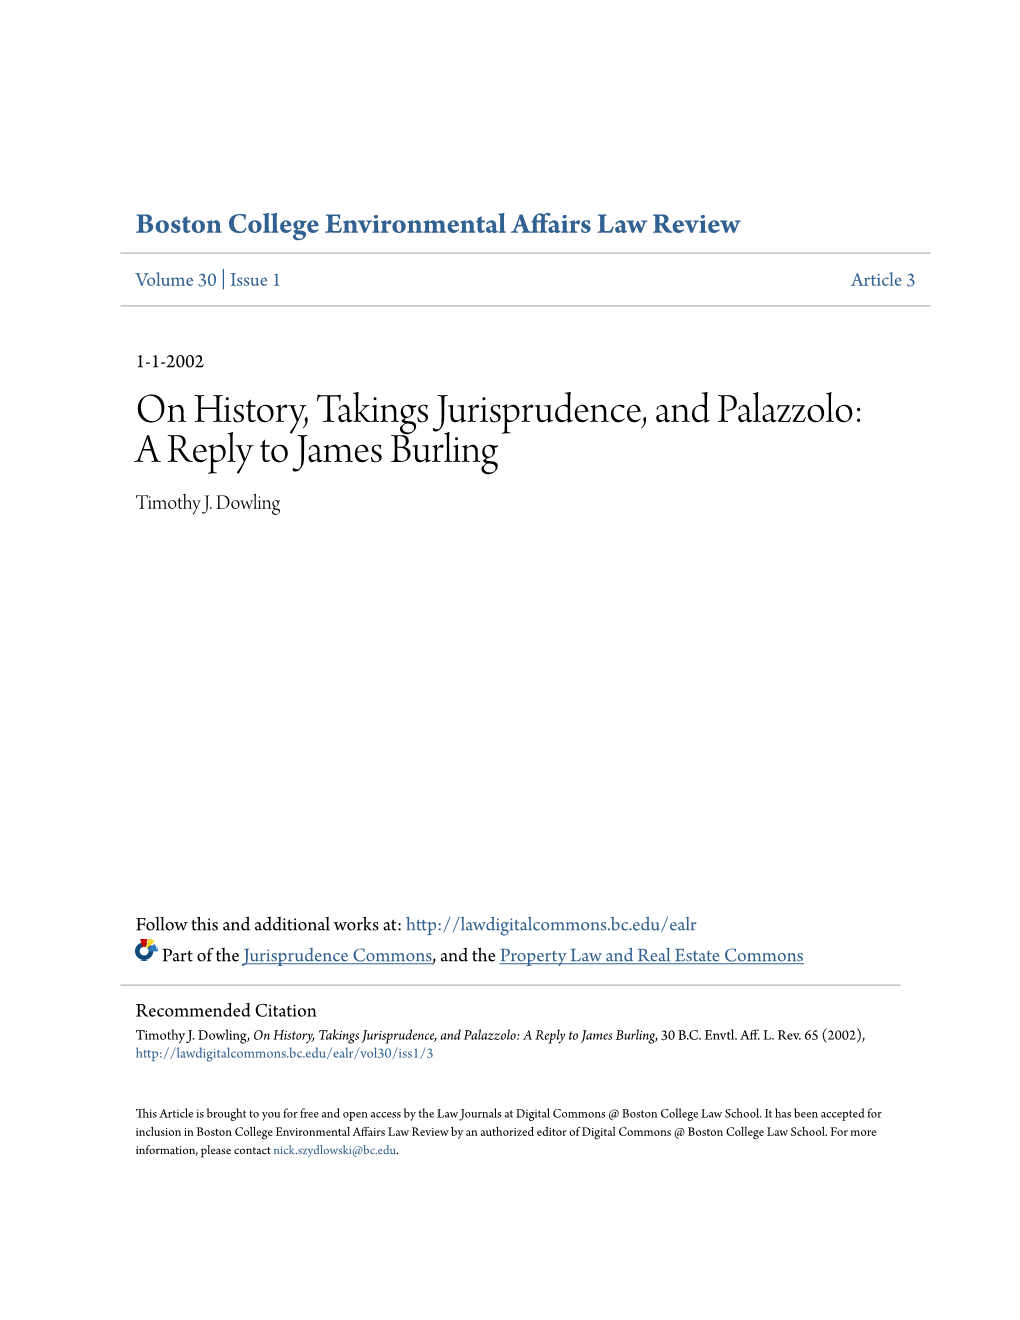 On History, Takings Jurisprudence, and Palazzolo: a Reply to James Burling Timothy J